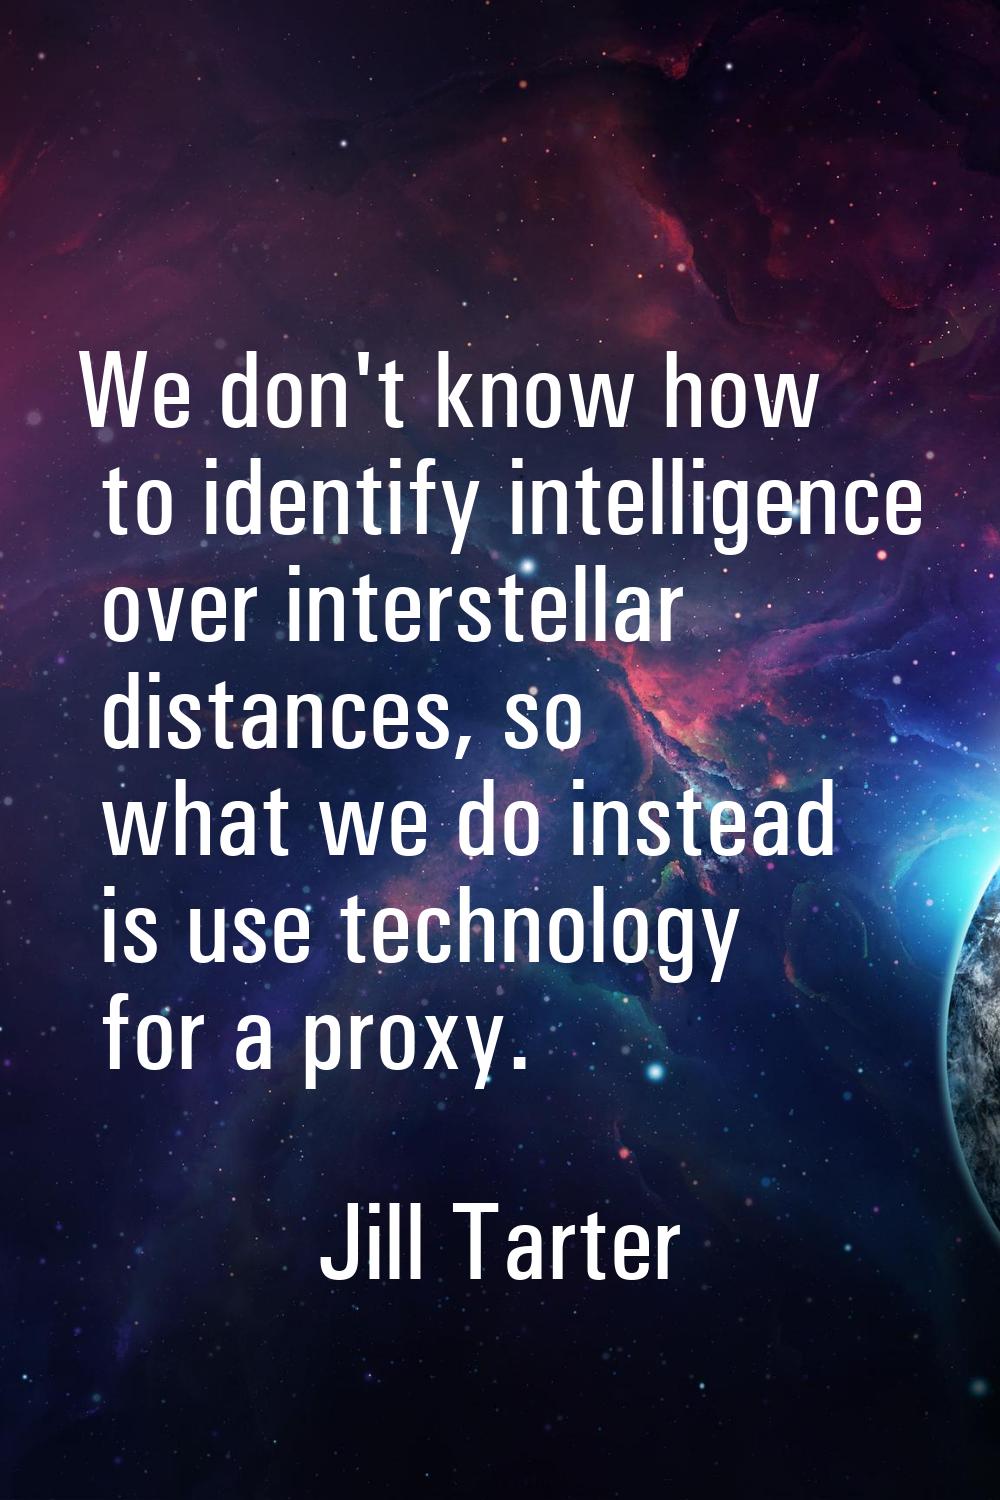 We don't know how to identify intelligence over interstellar distances, so what we do instead is us